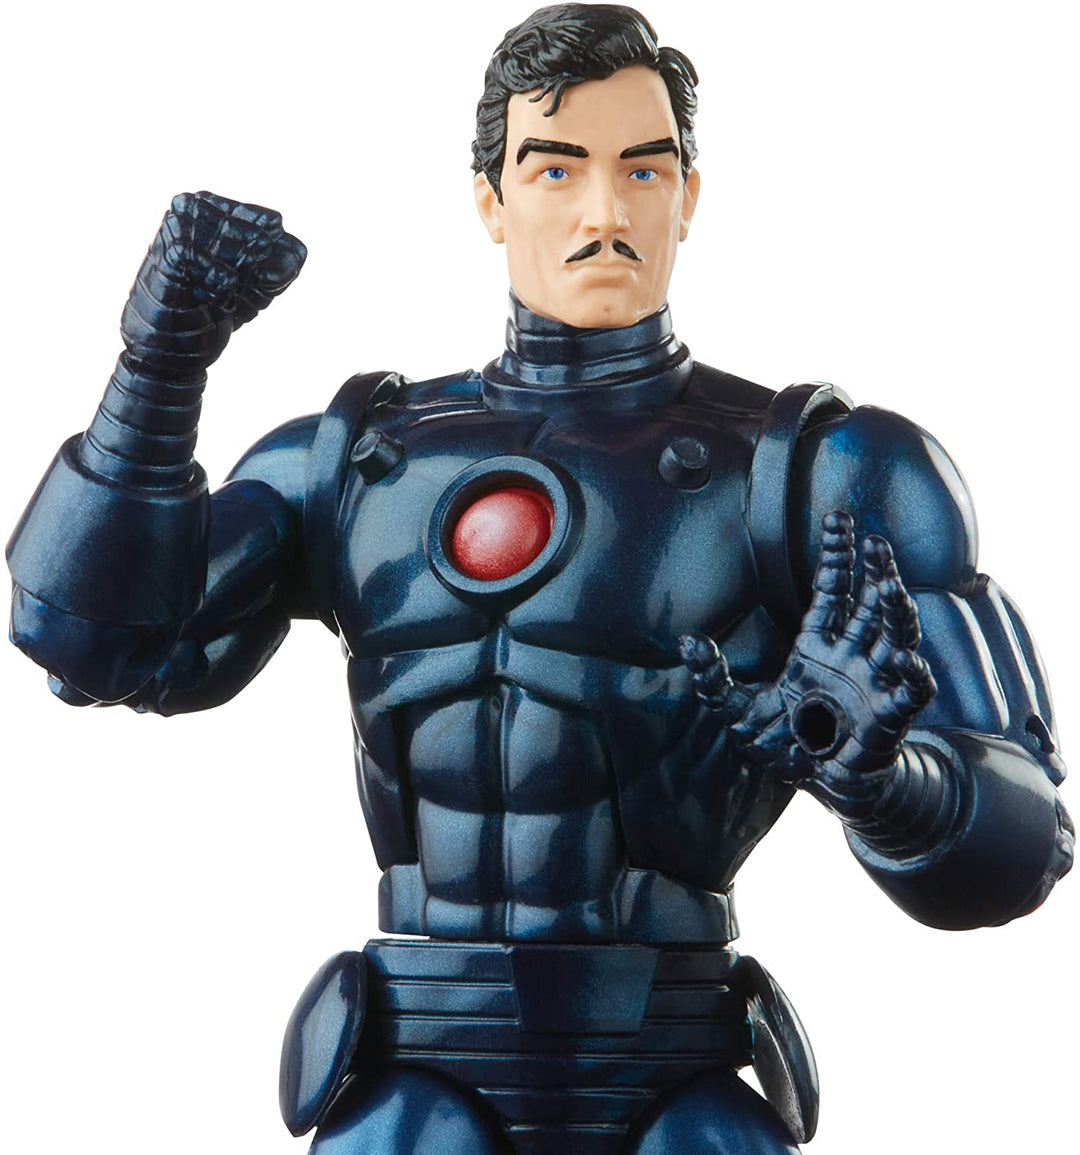 Hasbro Marvel Legends Series 6-inch Stealth Iron Man Action Figure Toy, Includes 5 Accessories and 1 Build-A-Figure Part, Premium Design and Articulation Multicolor, F0357